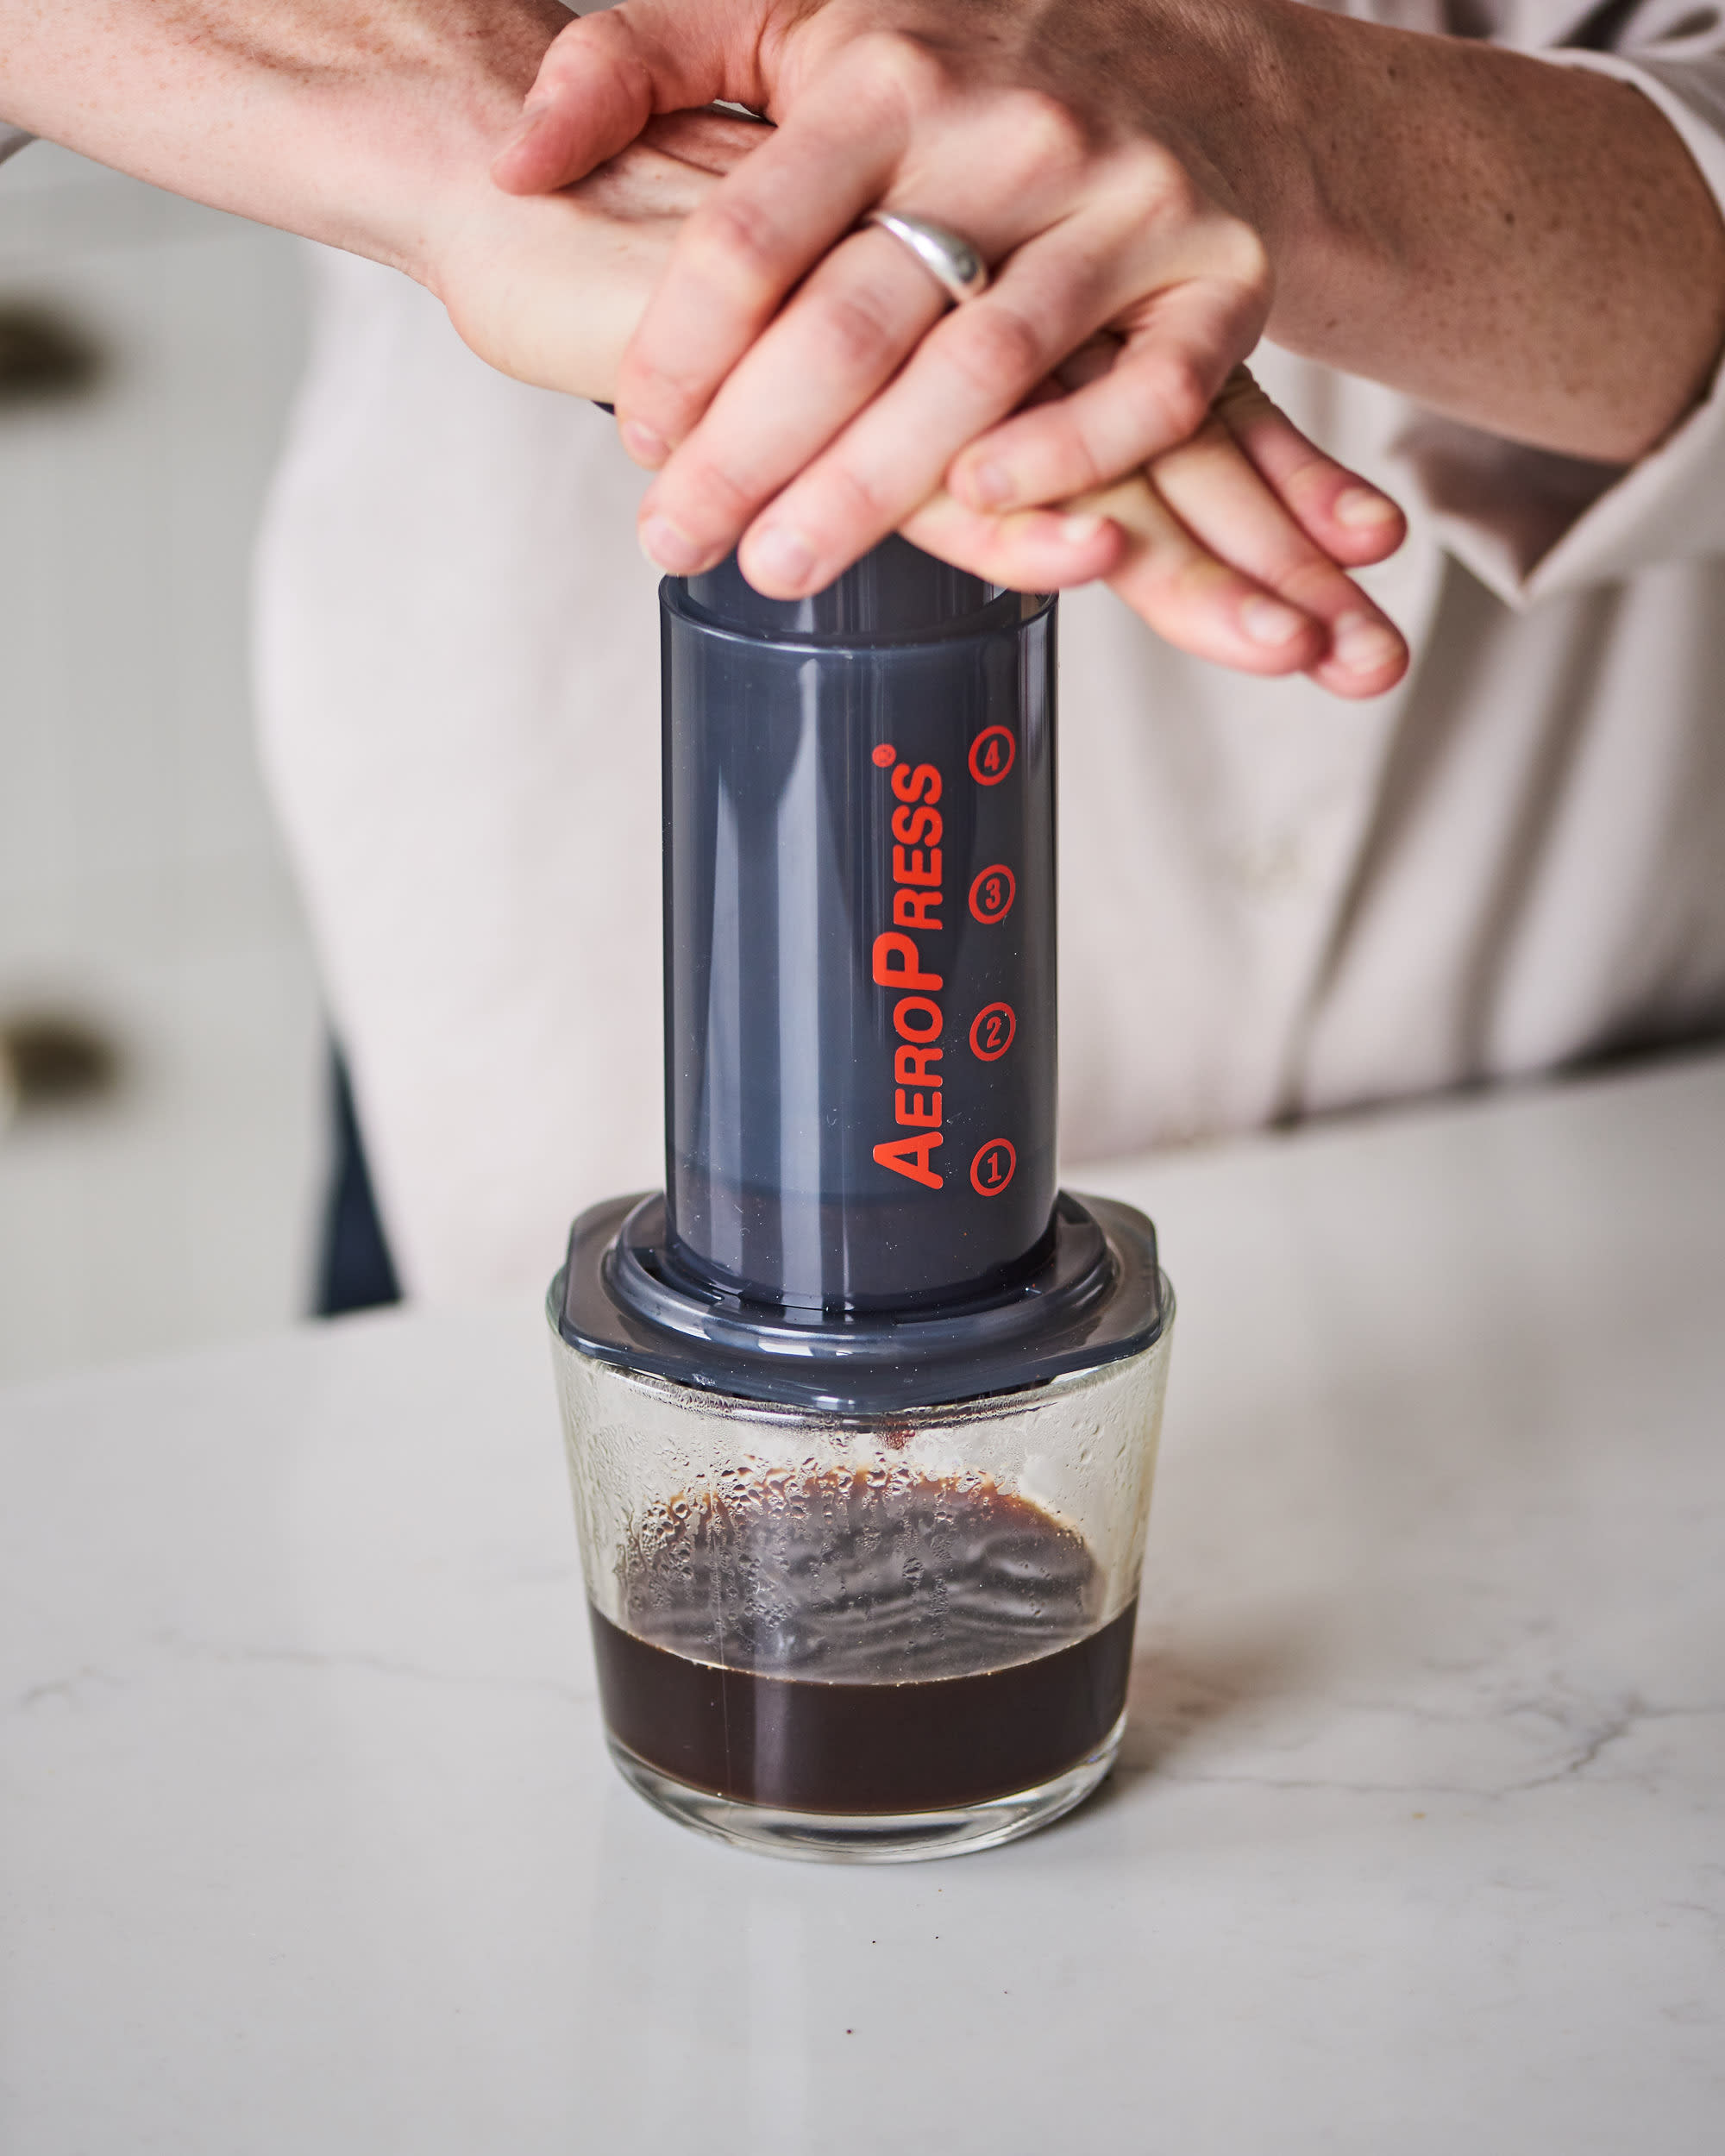 The 4 Best Ways to Brew Coffee On the Go - The GentleManual